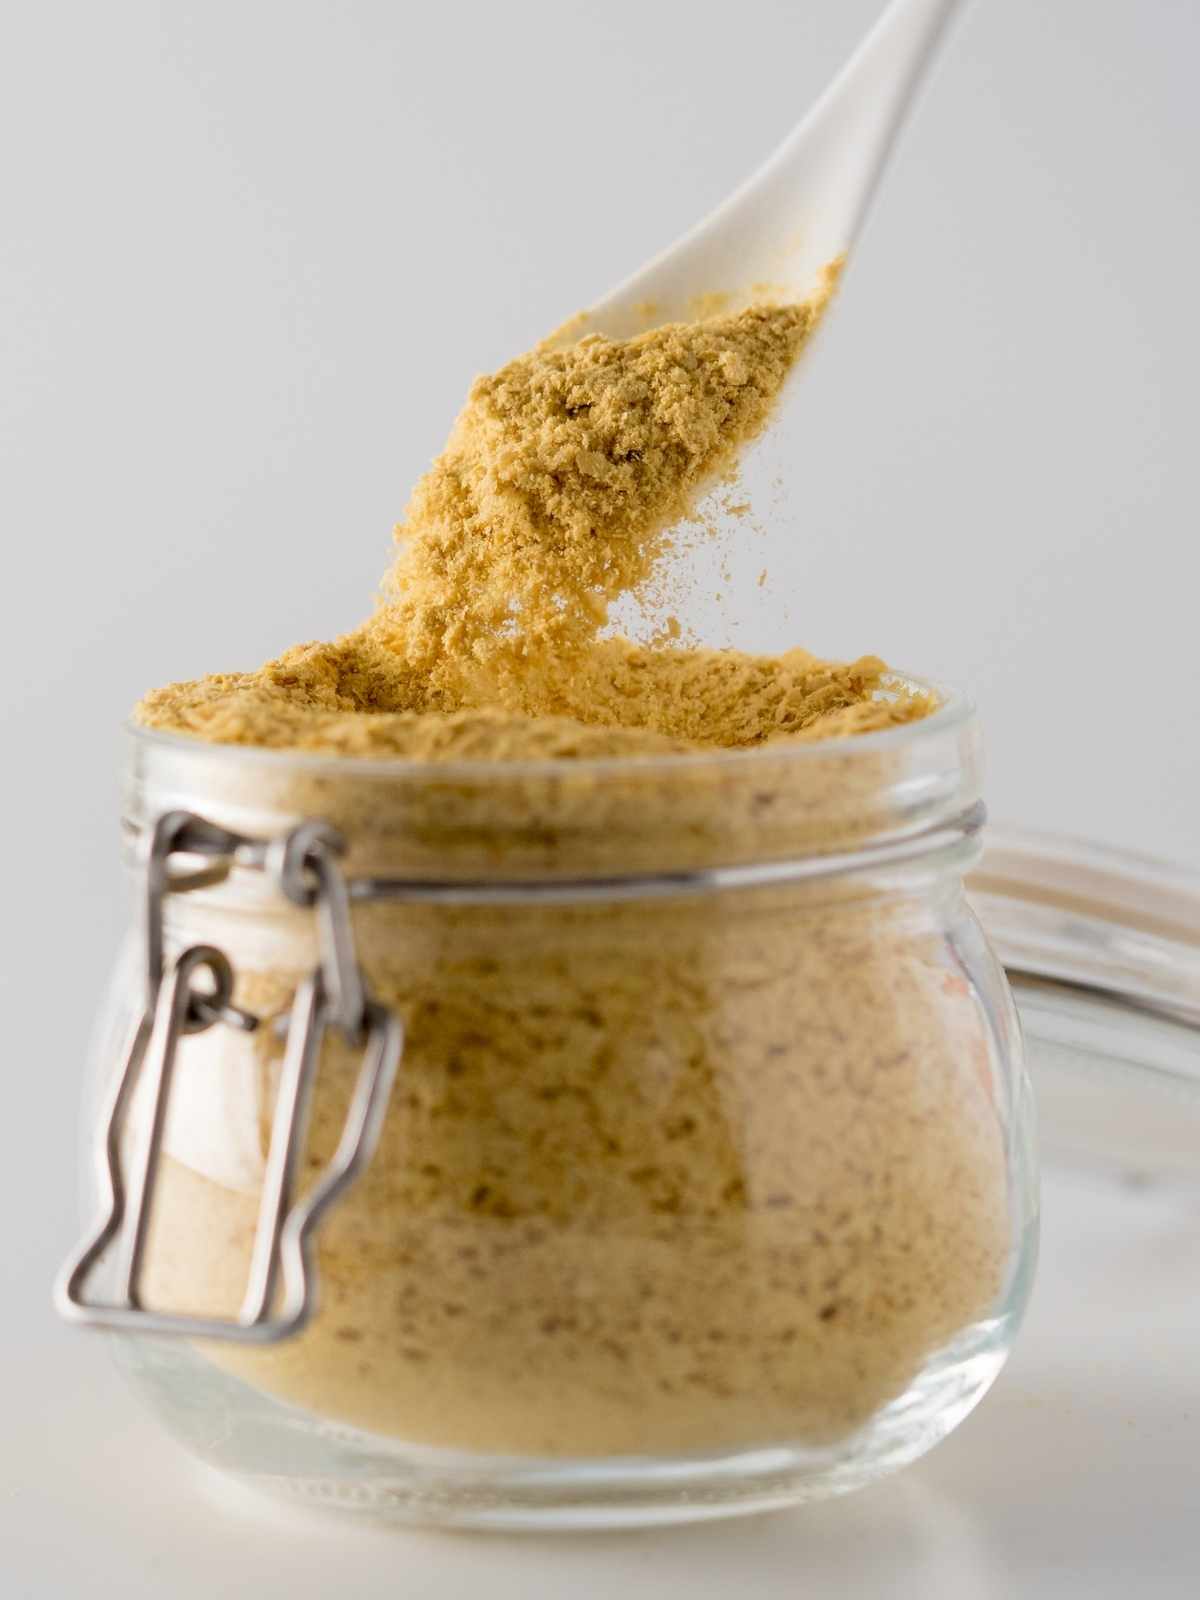 Spoon scooping nutritional yeast out of a glass jar.